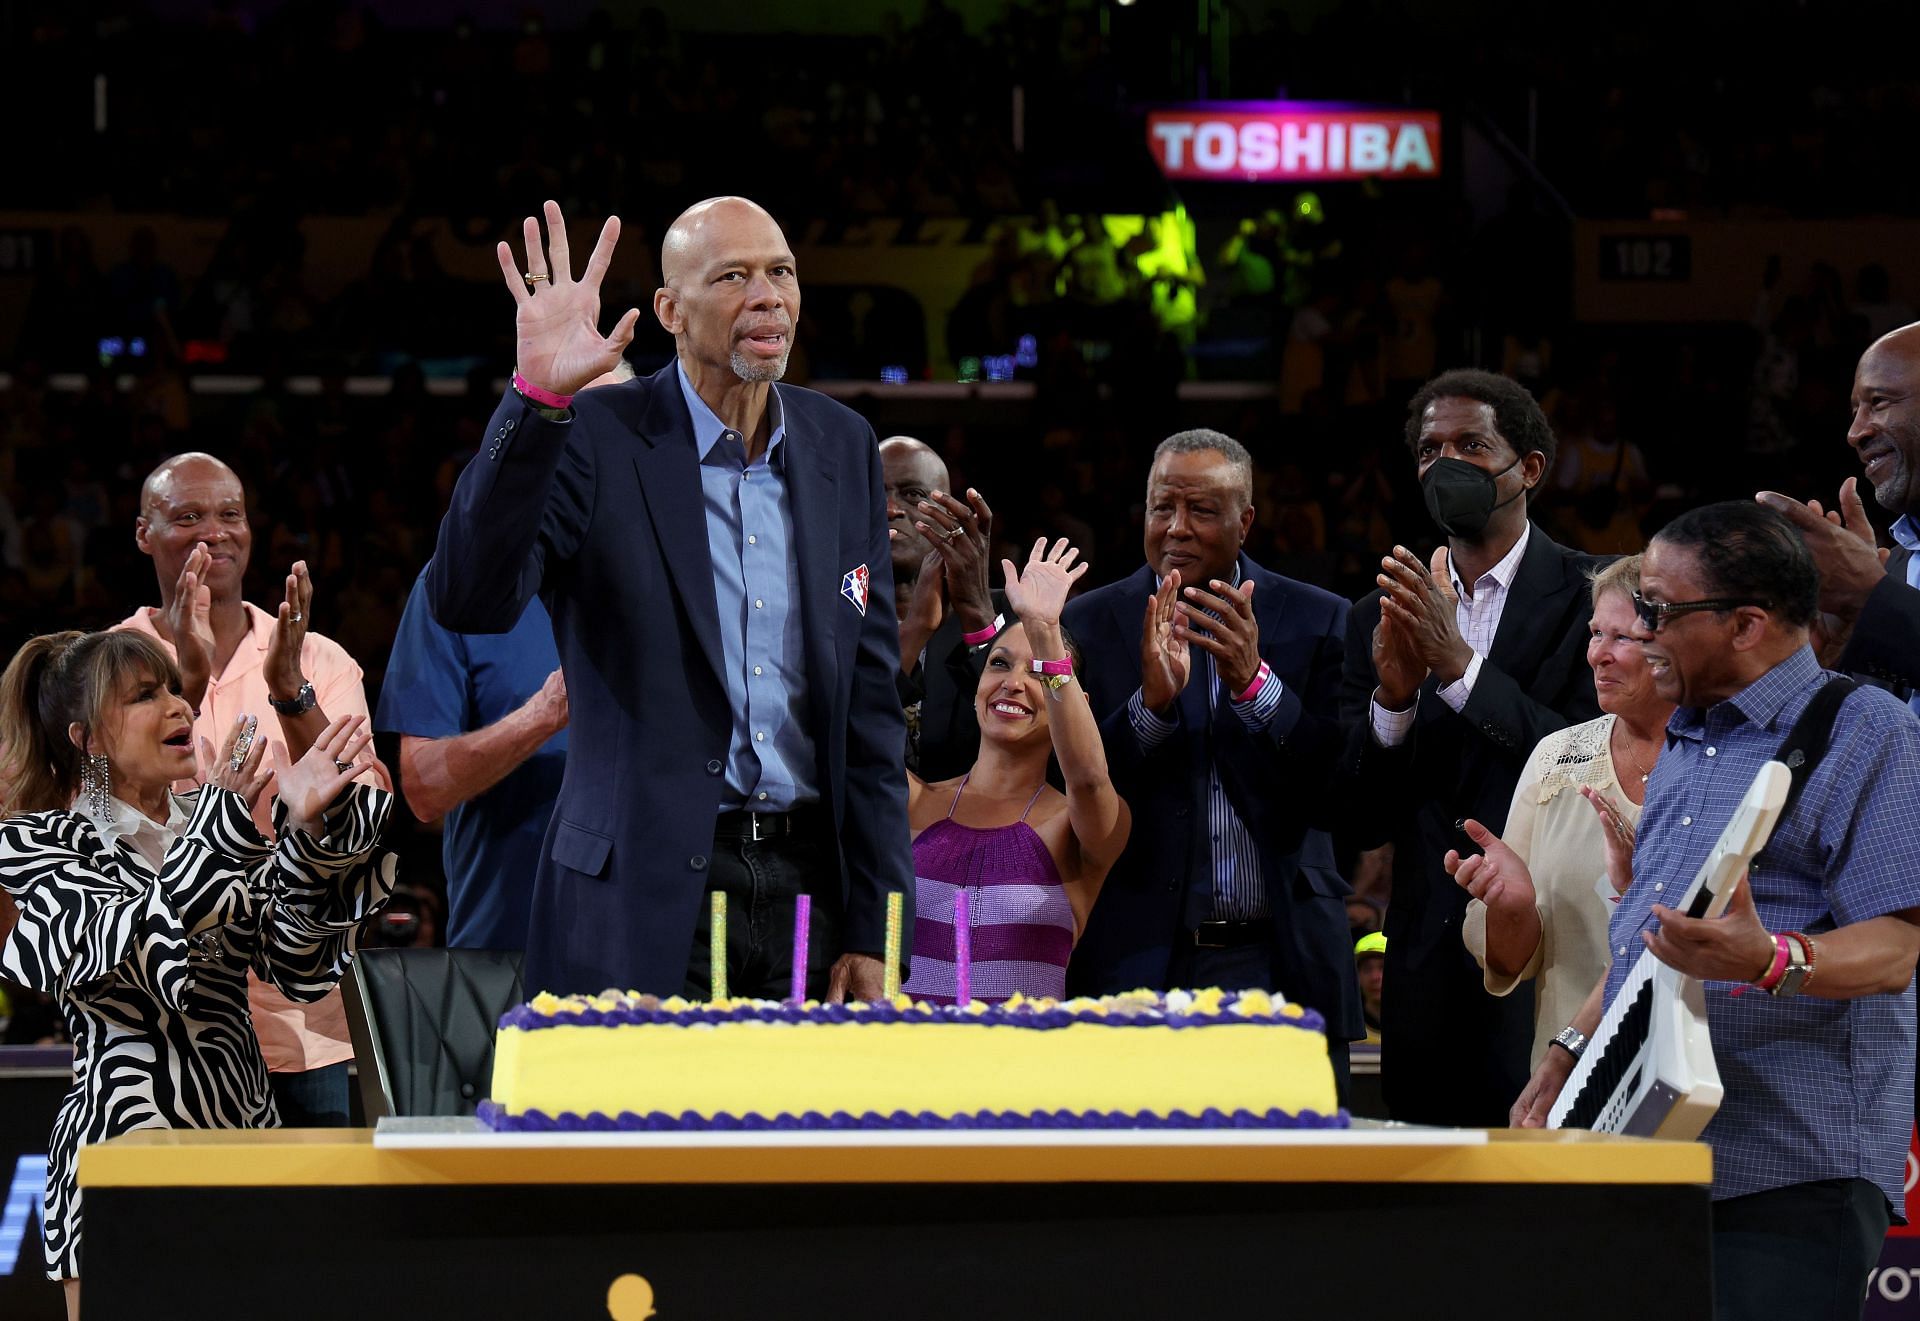 Kareem Abdul-Jabbar is a Lakers legend and holds the scoring lead, but the current Laker is close to him.